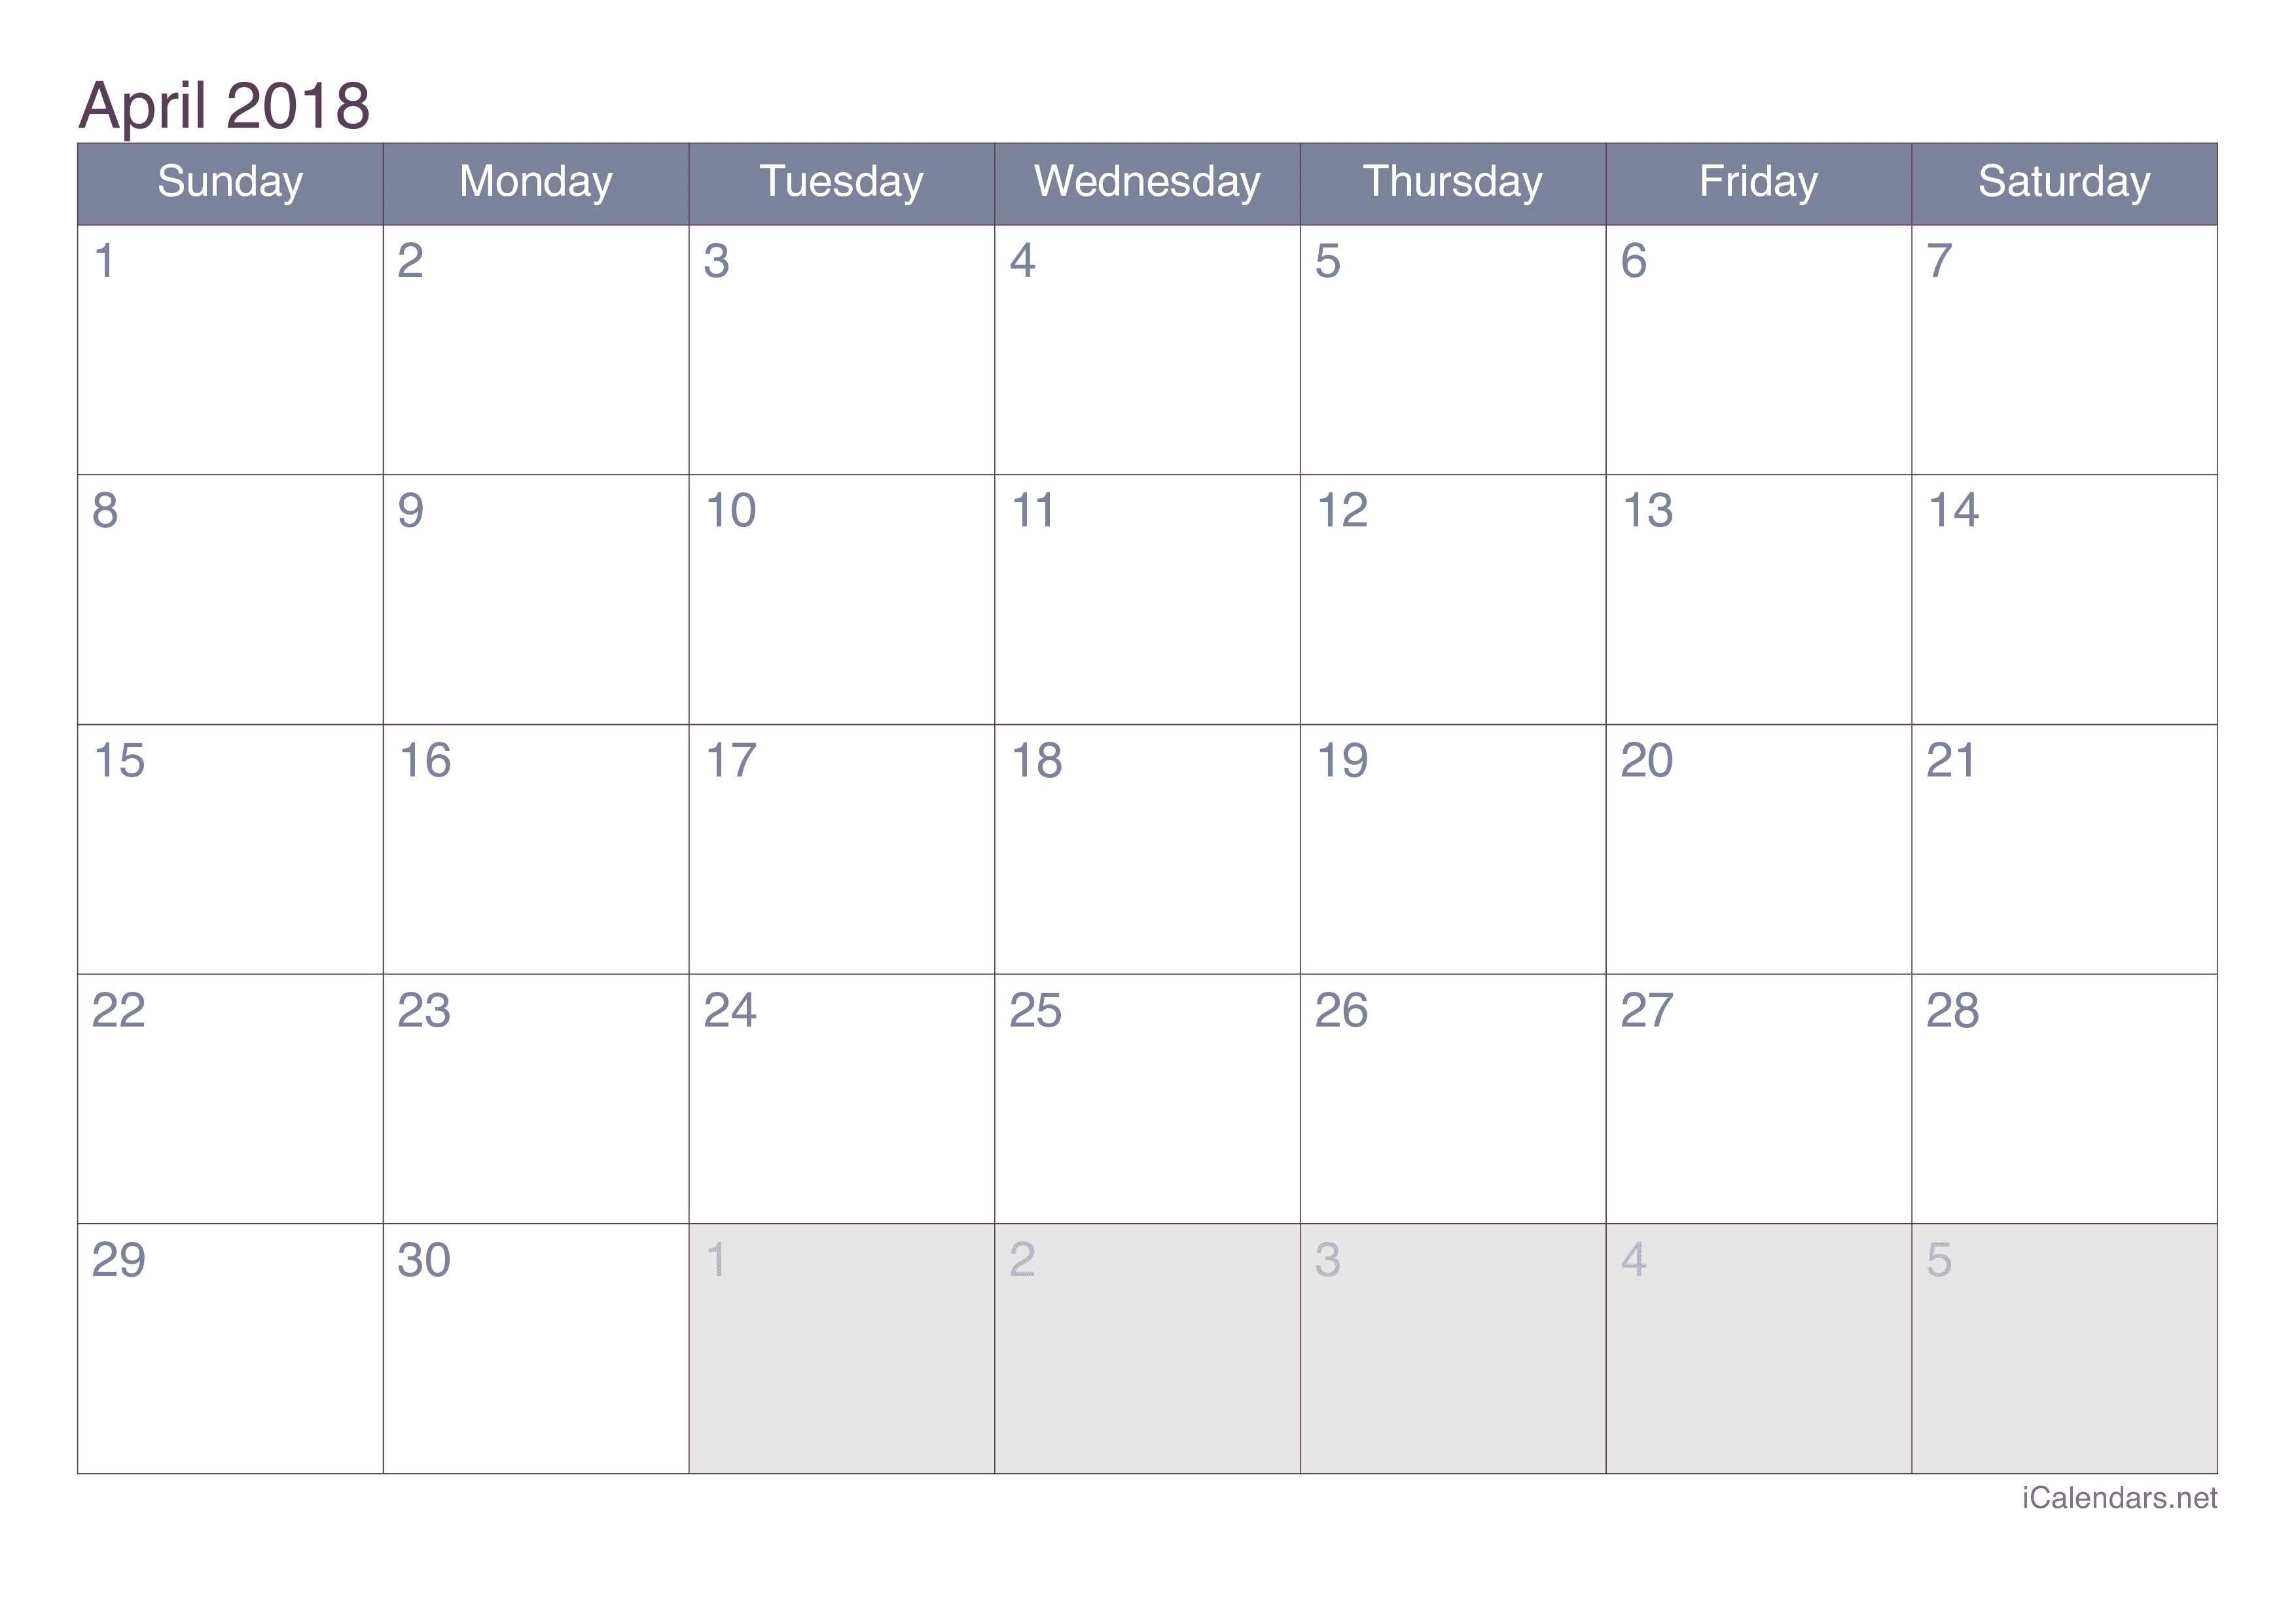 april-2018-calendar-templates-for-word-excel-and-pdf